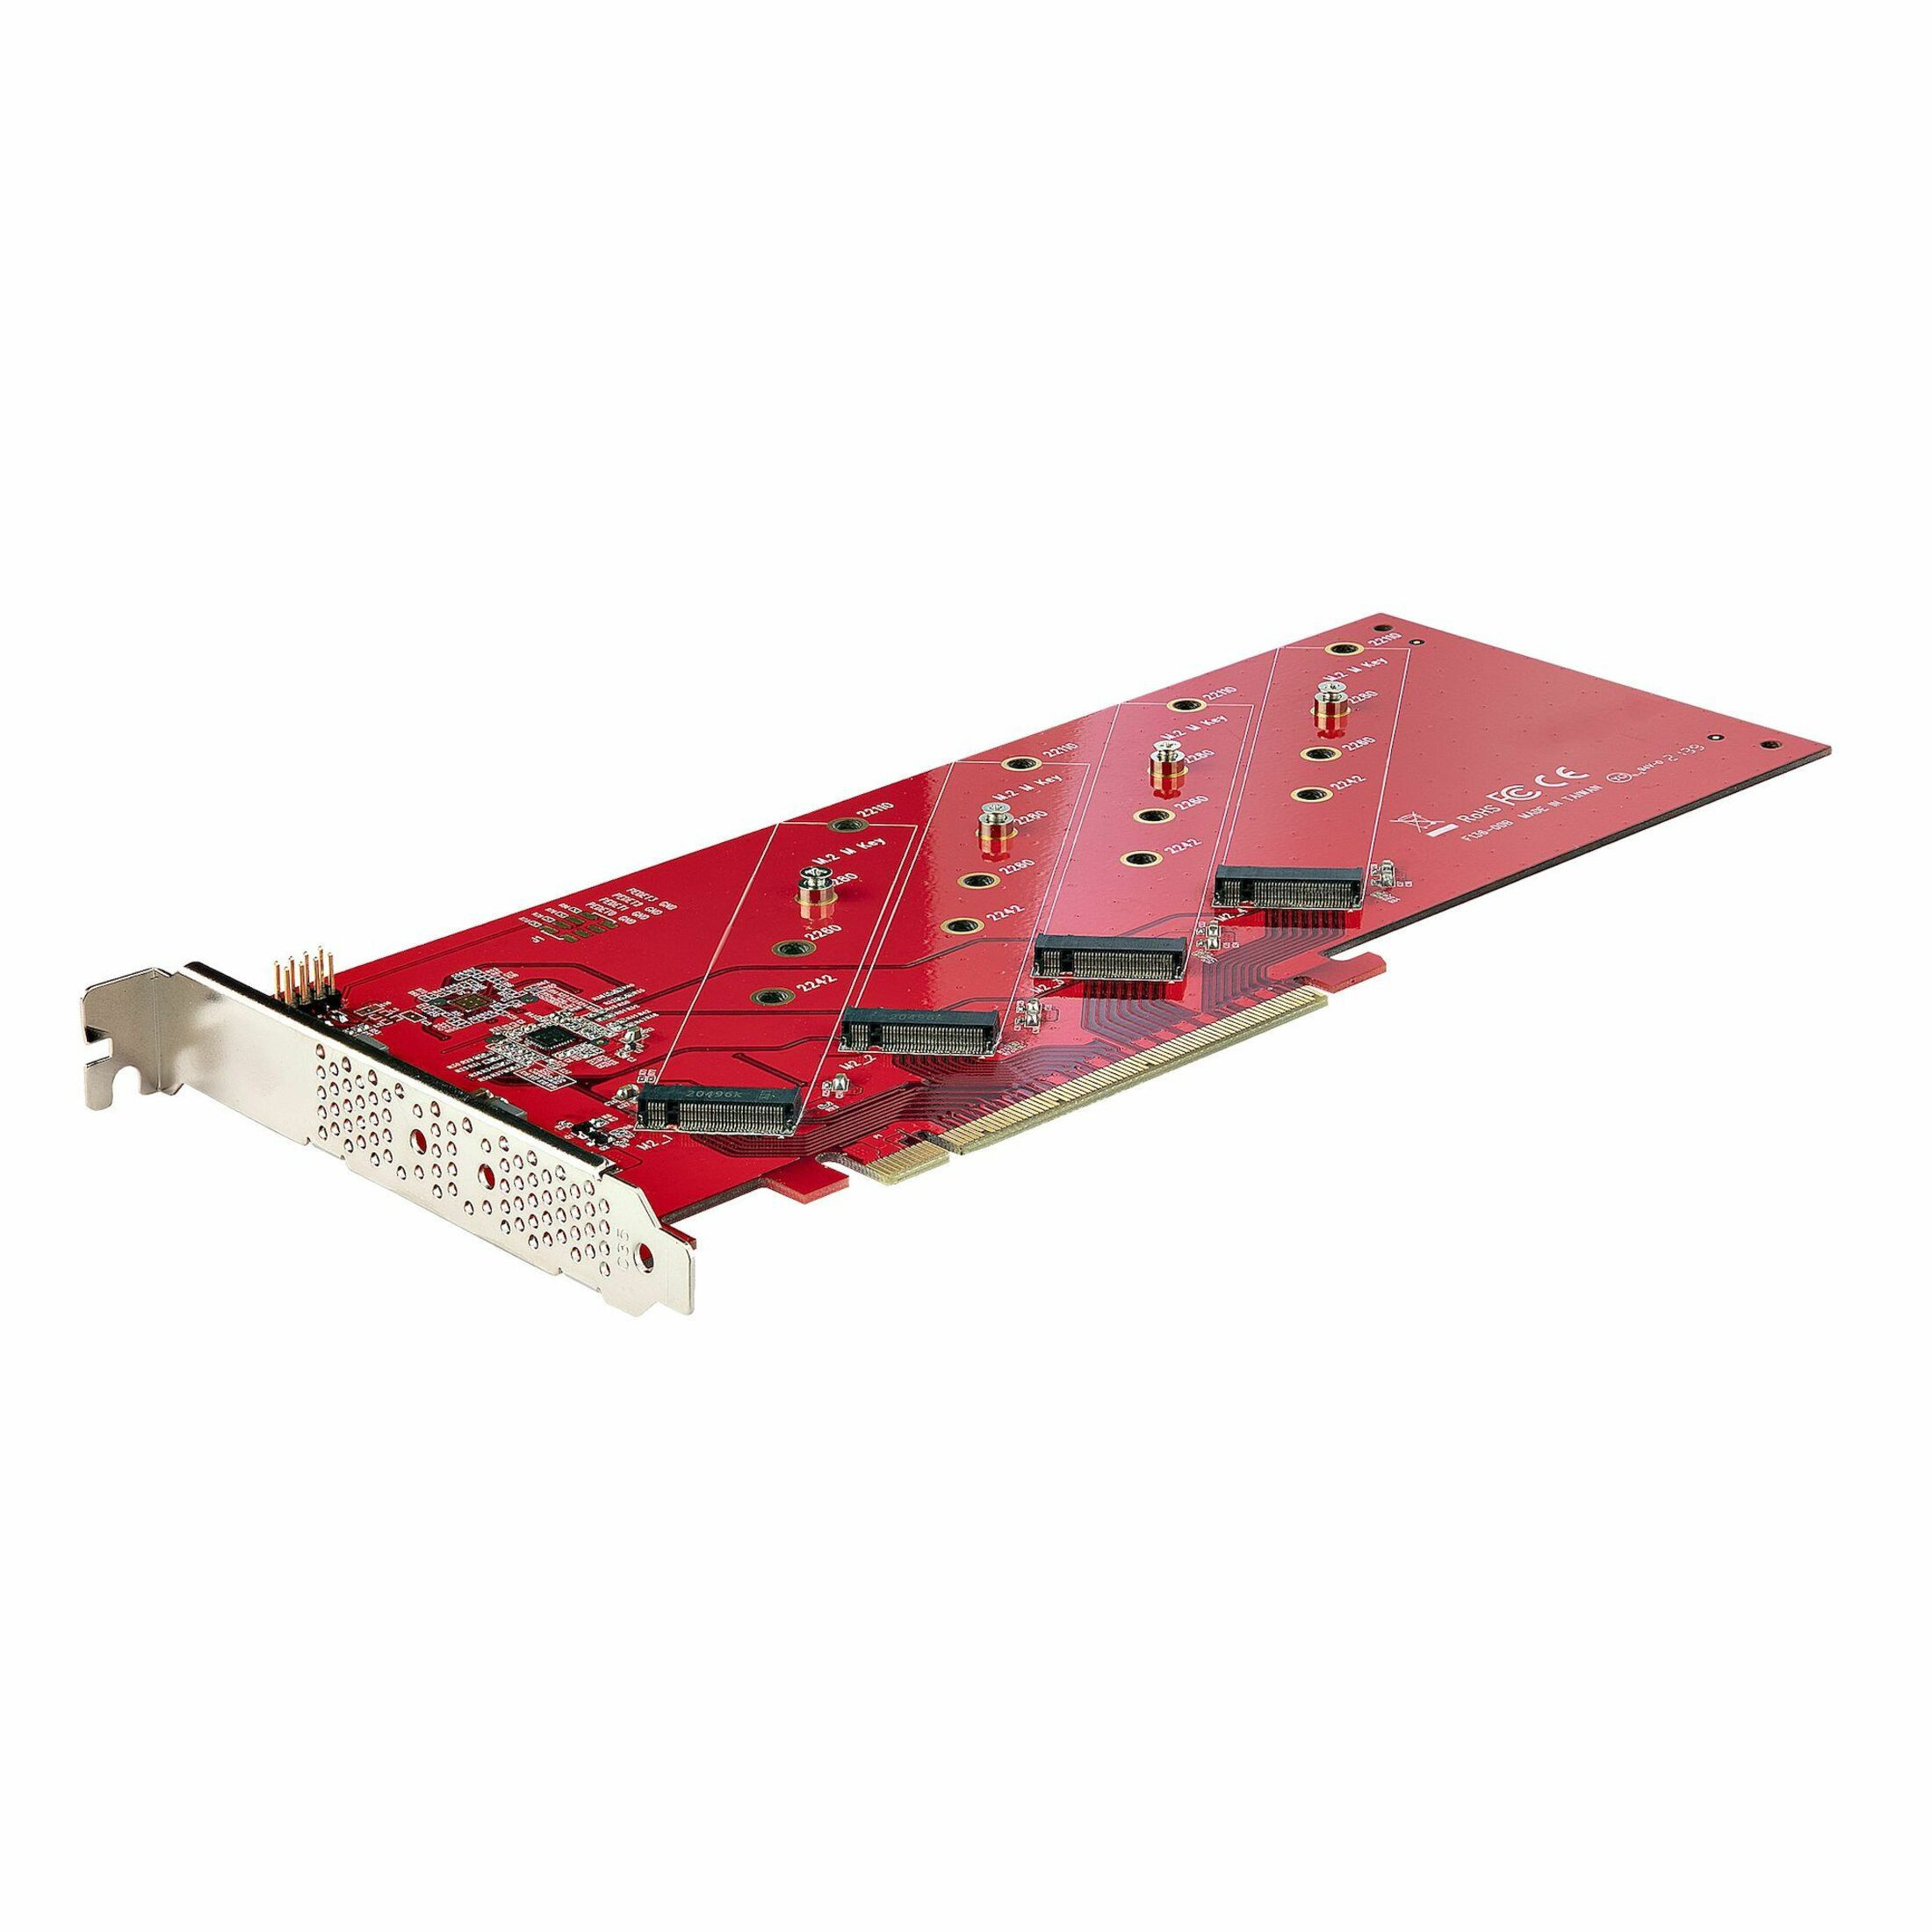 rinse Honest theme Startech .com Quad M.2 PCIe Adapter Card, x16 Quad NVMe or AHCI M.2 SSD to  PCI Express 4.0, Up to 7.8GBps/Drive, For 2242/2260/2280/2...  QUAD-M2-PCIE-CARD-B - Corporate Armor